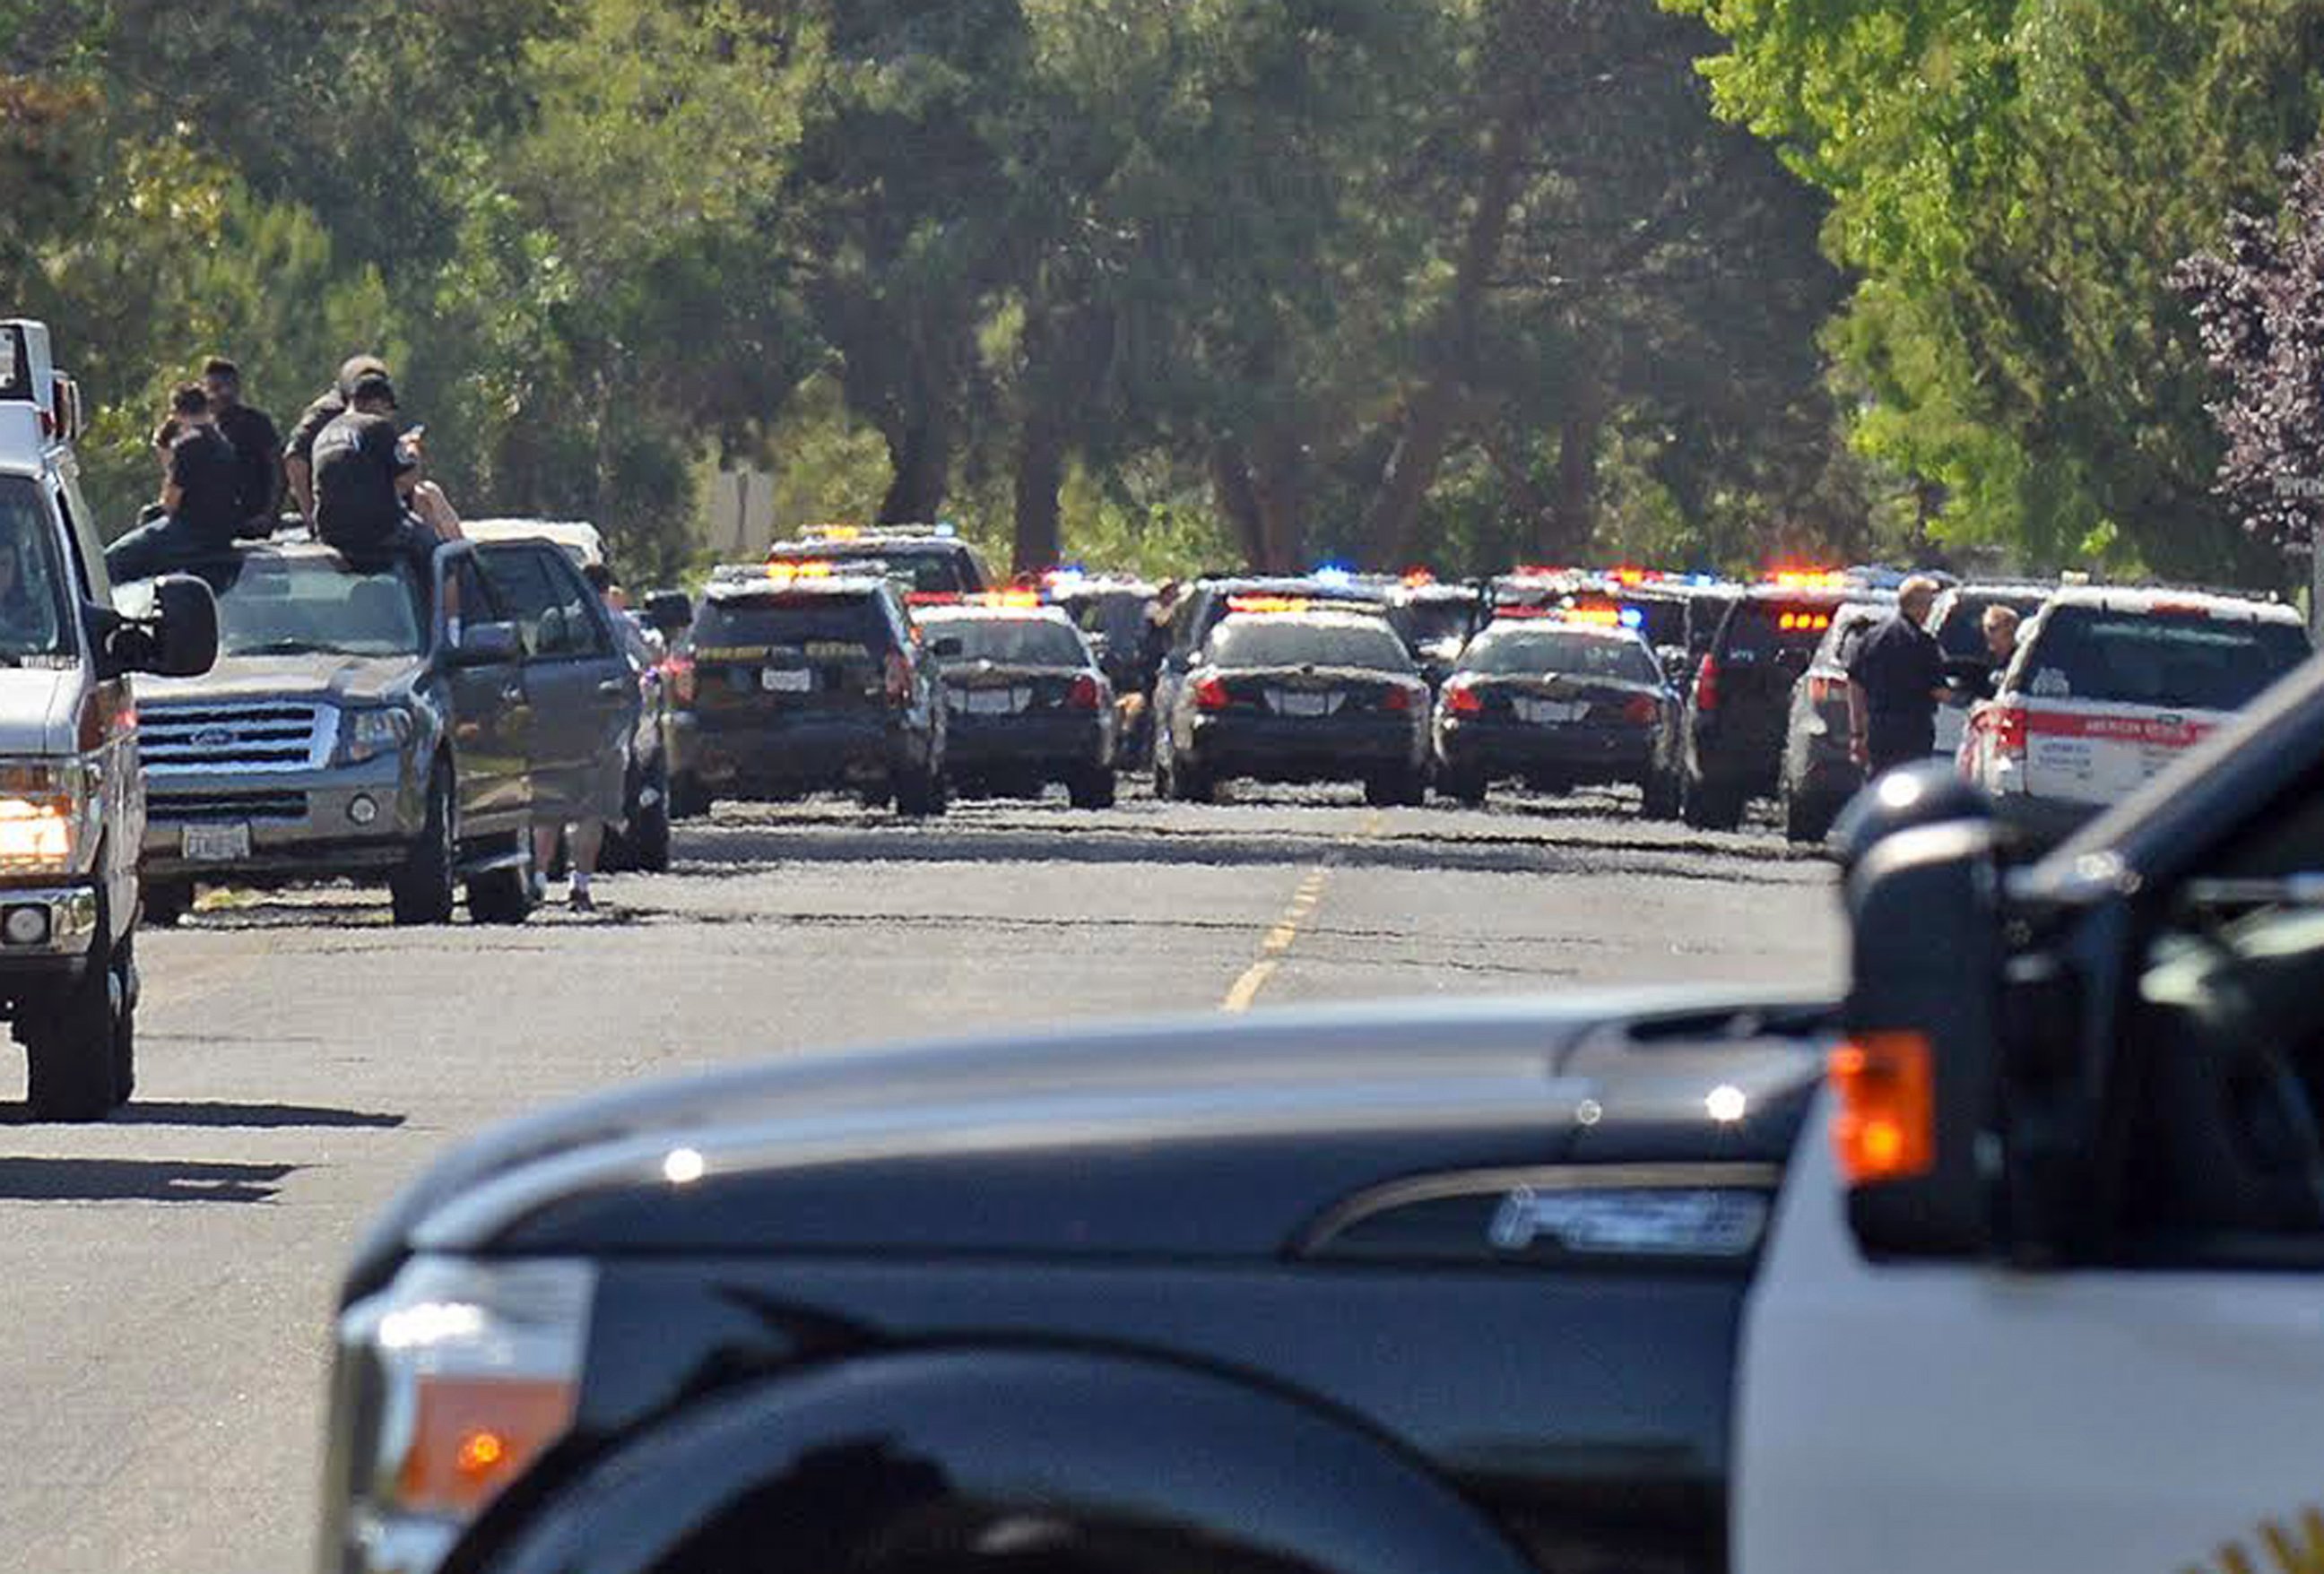 PHOTO: California Highway Patrol units converge on a street in Solvang, Calif., after pursuing a car being sought in a statewide Amber Alert in the disappearance of a Northern California 15-year-old girl, in Southern California, May 26, 2016. 